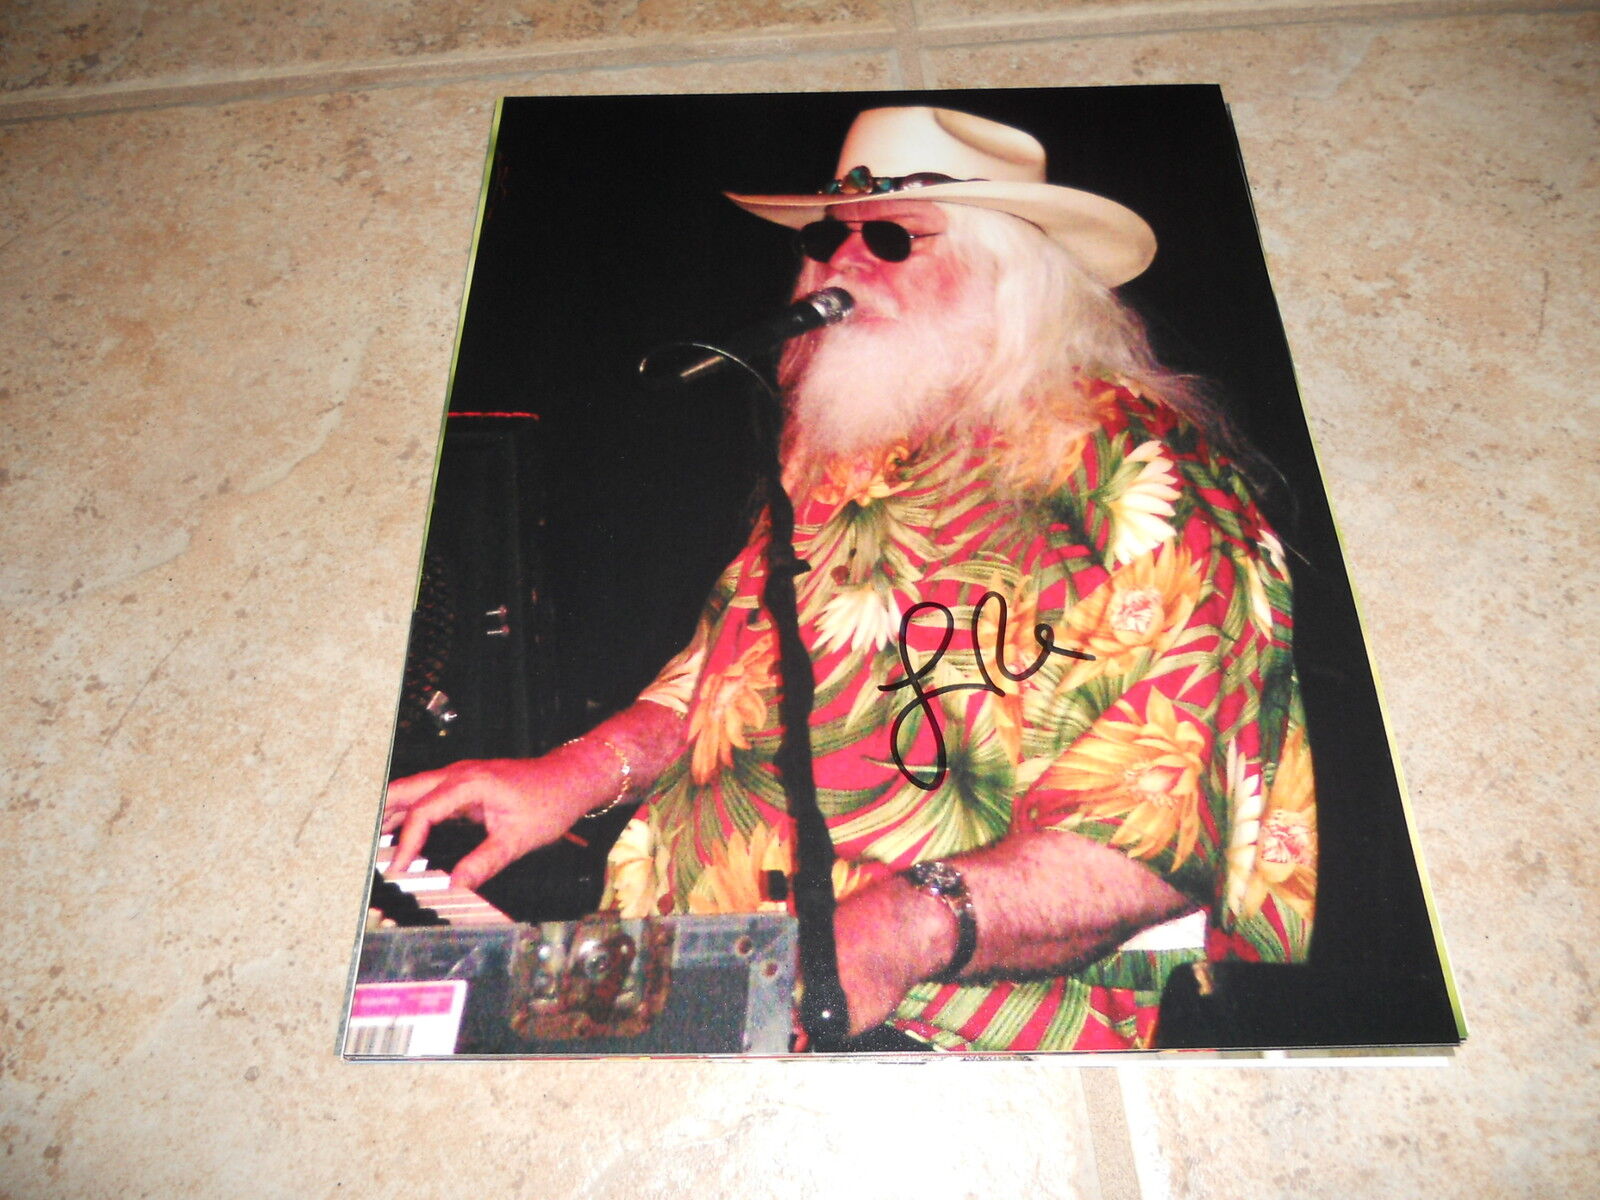 Leon Russell Signed Autographed 8x10 Live Music Photo Poster painting #3